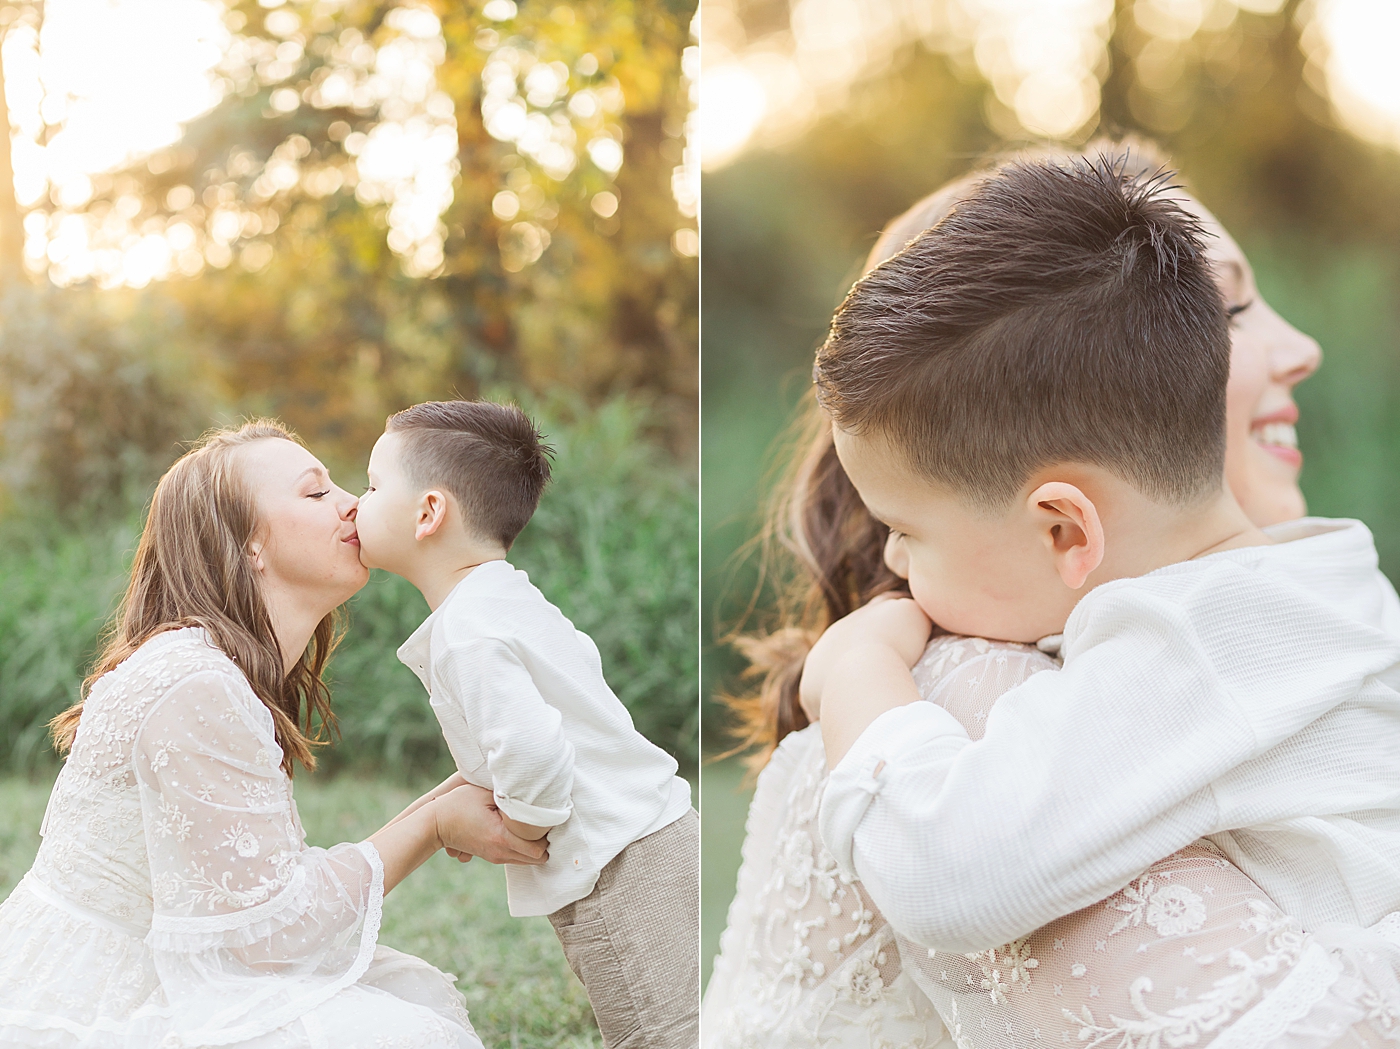 Sweet moments of Mom and her oldest son. Photo by Fresh Light Photography.